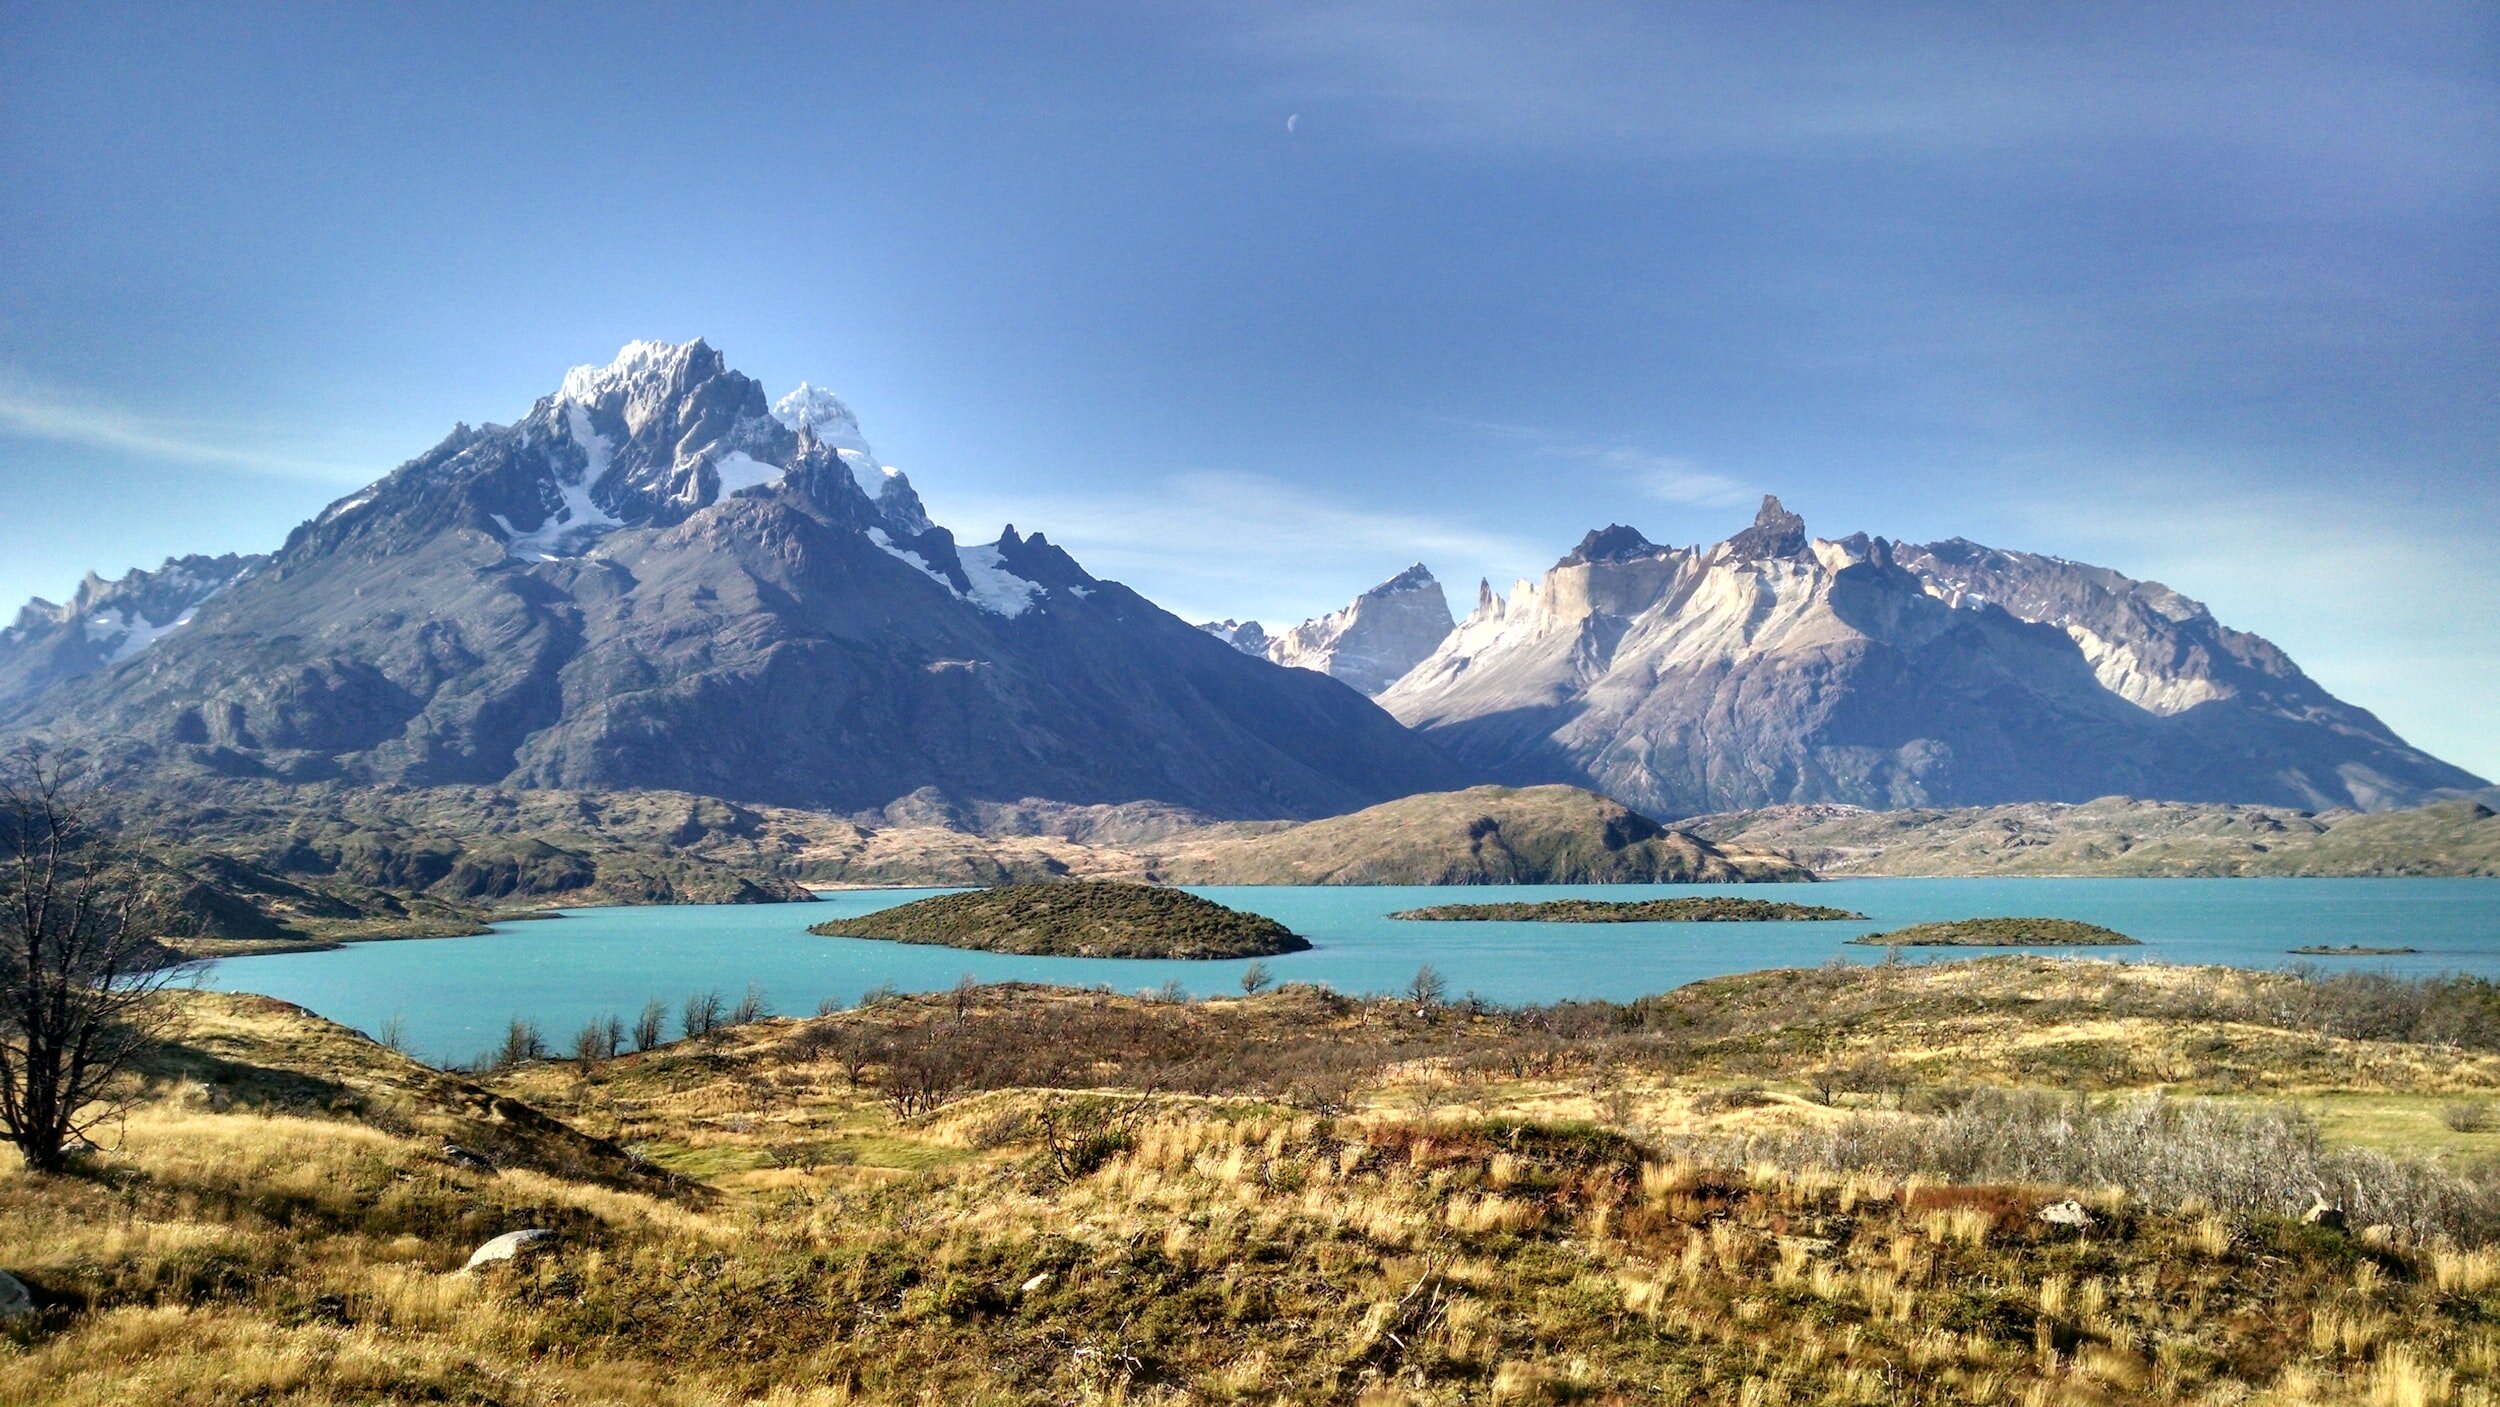 Torres del Paine's majestic, craggy peaks rise over  a grey-blue lake backed by almost yellow, windswept scrub.